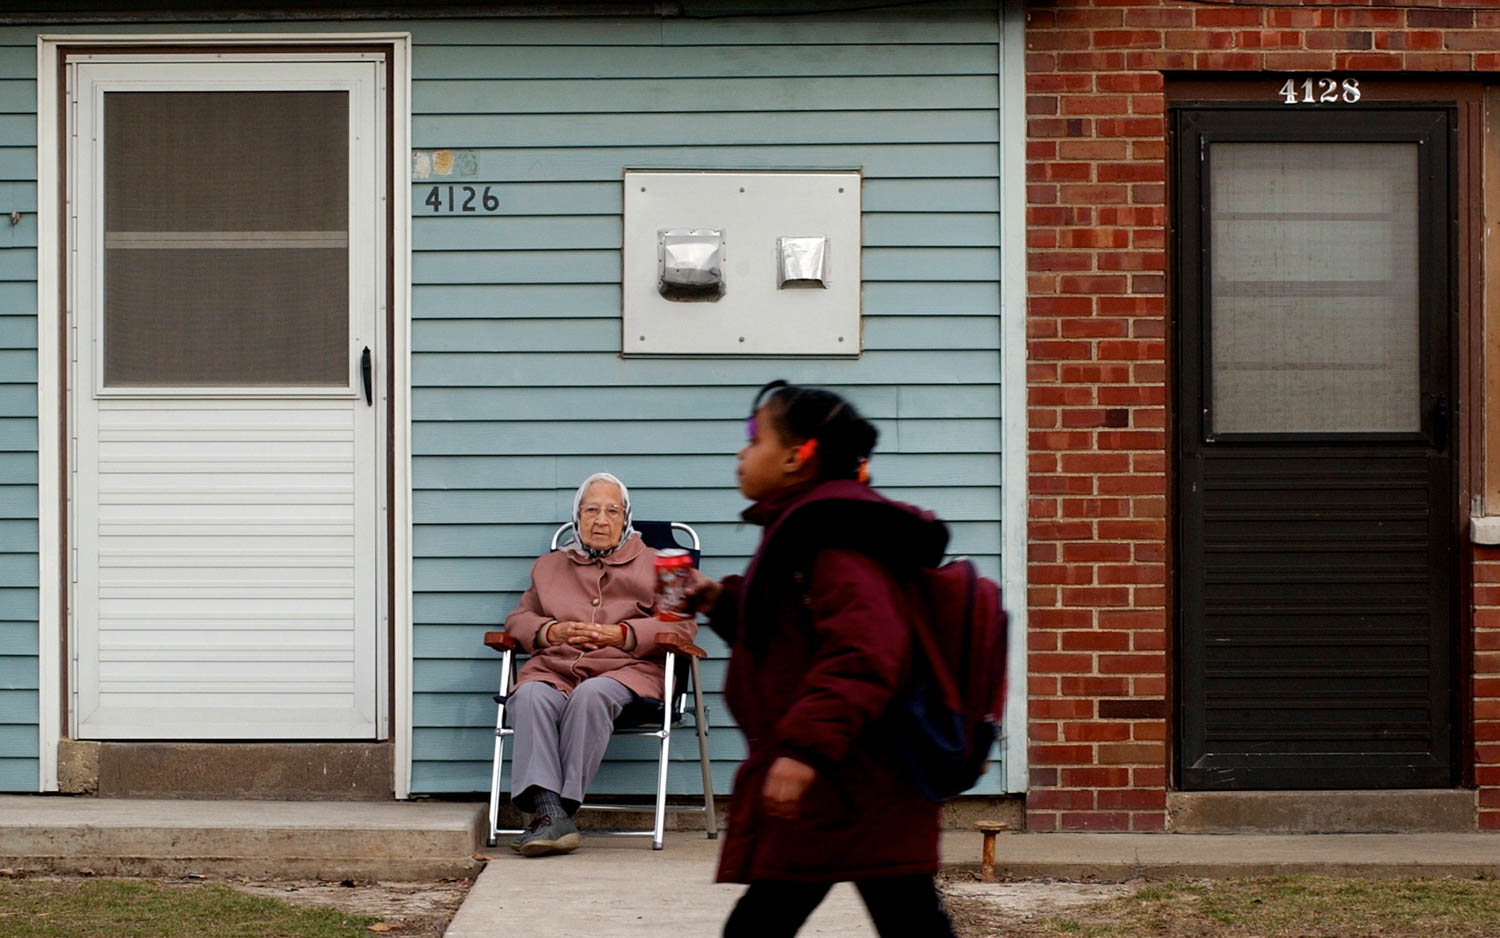 90-year-old Esther Funk of Moline watches the children come home from school Wednesday afternoon while she sitting outside her apartment in Springbrook Courts. Funk has lived in the public housing complex for 50-years. When the weather is nice she says she can usually be found outside enjoying the view from her front stoop. (Todd Mizener - Dispatch/Argus)